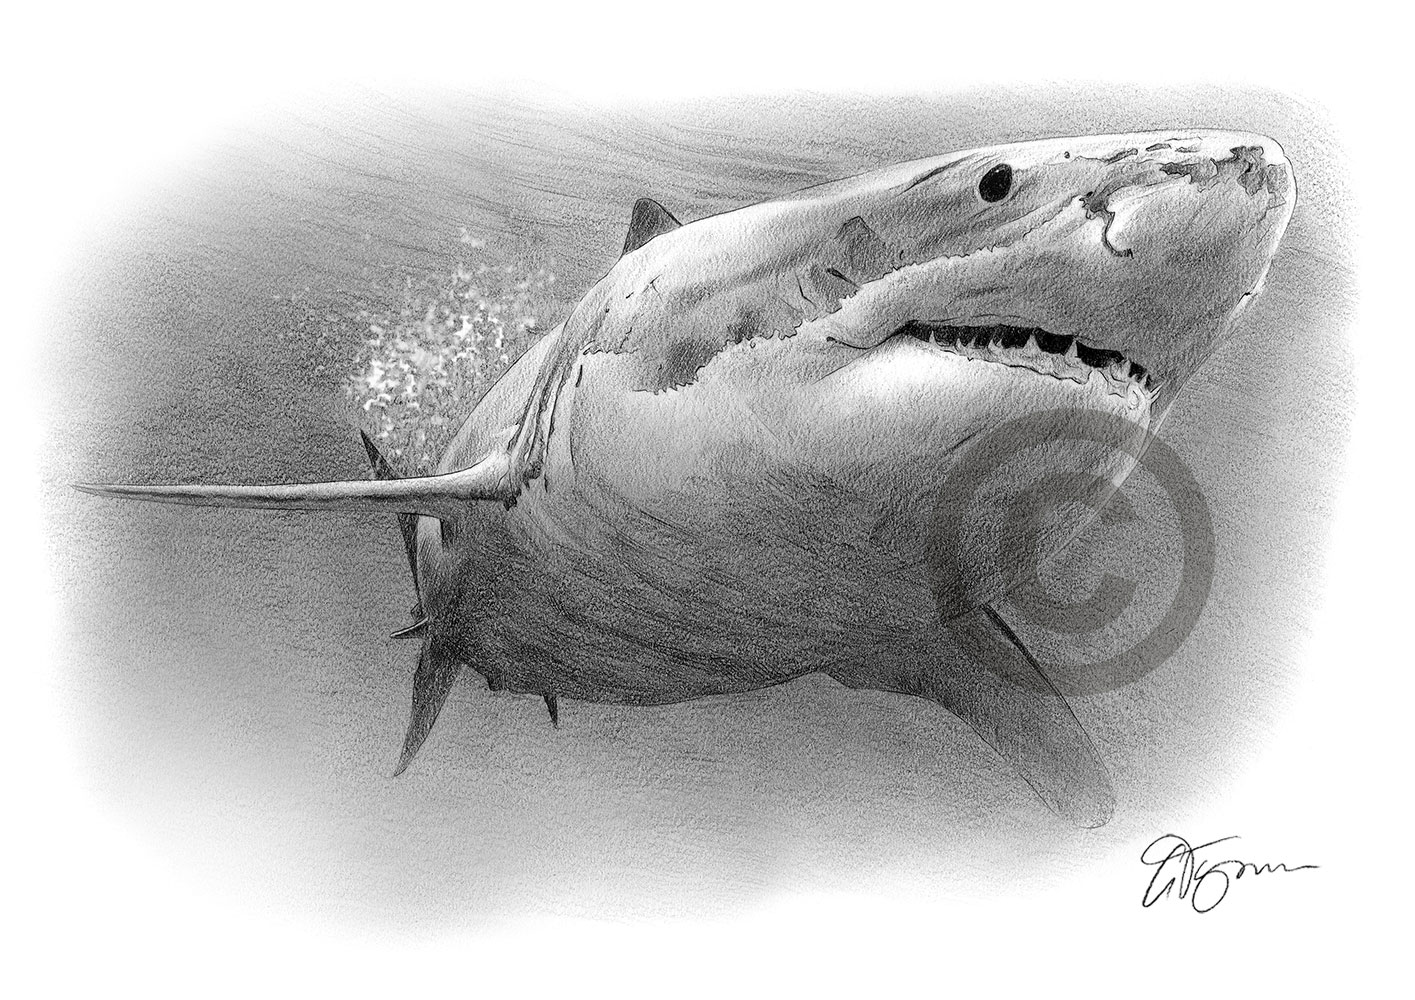 Pencil drawing of a great white shark by artist Gary Tymon